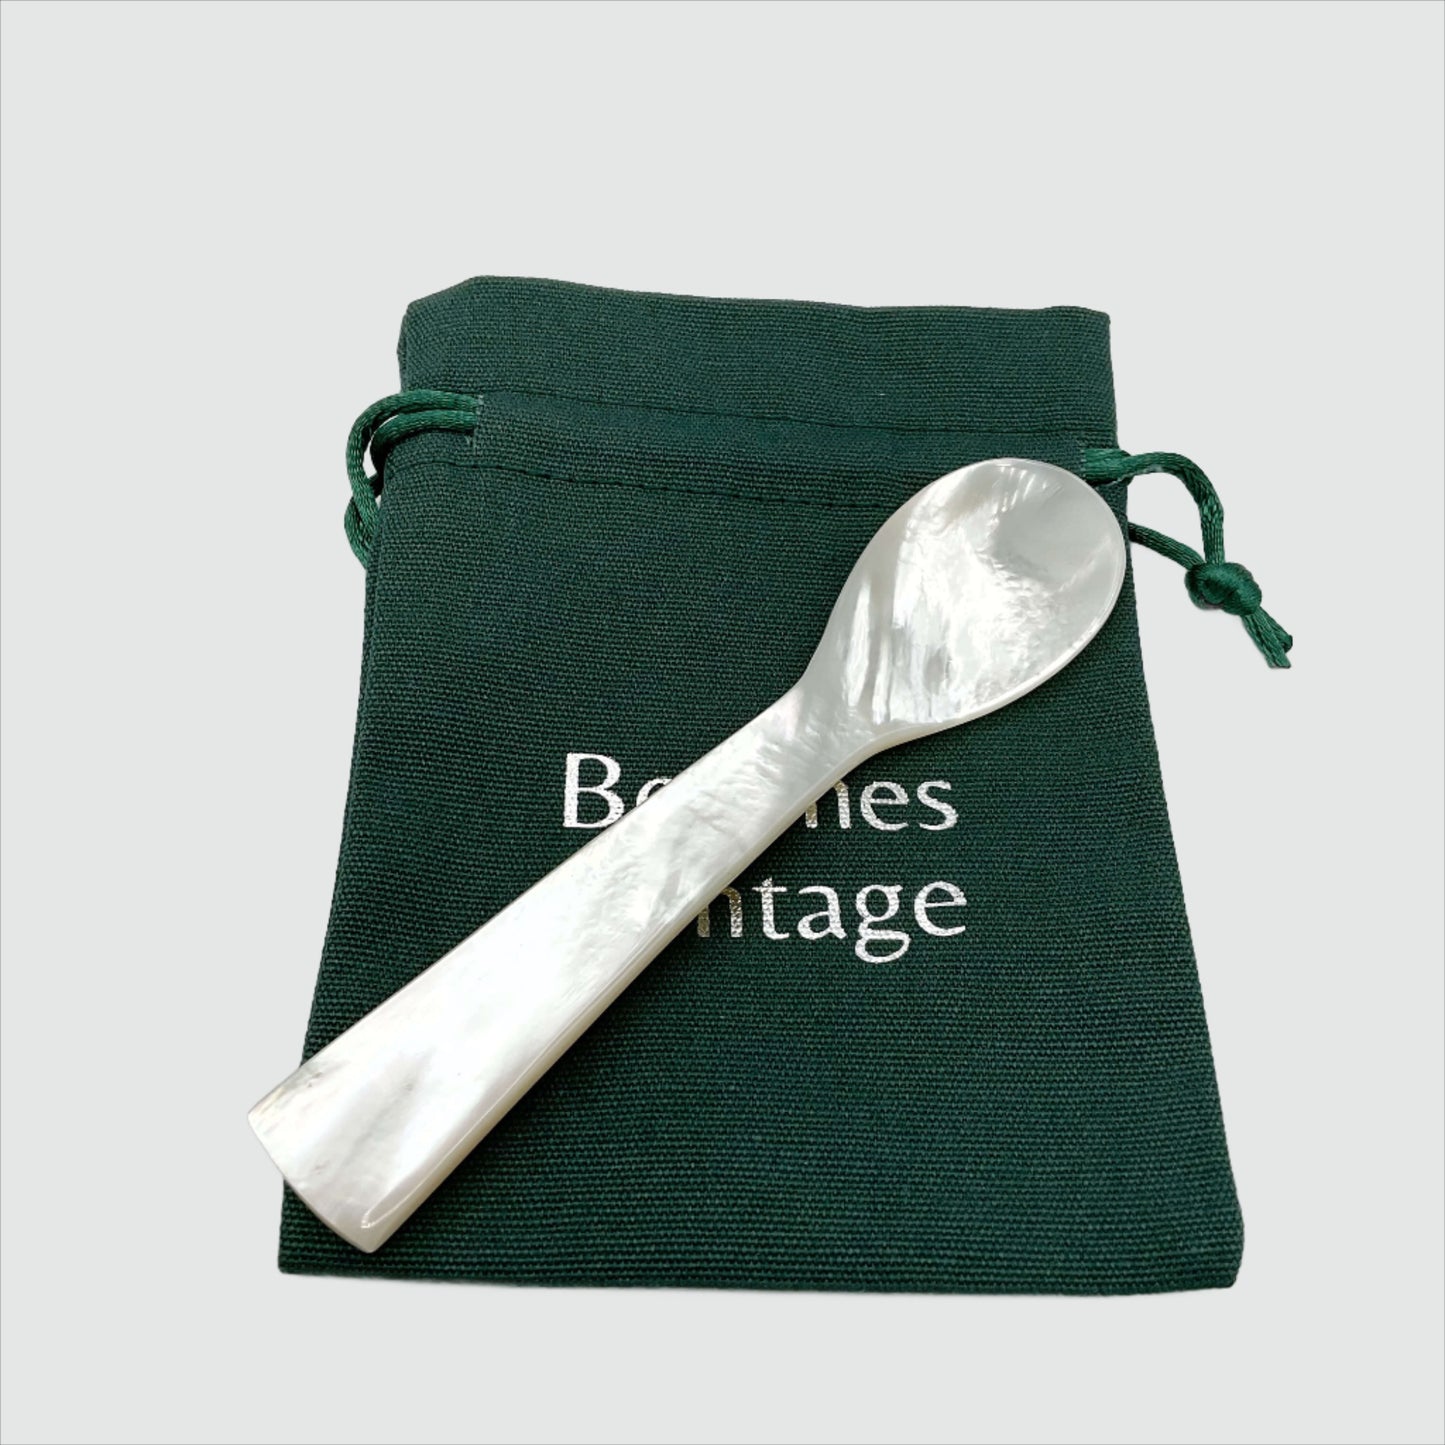 Mother of Pearl caviar spoon on a green gift bag